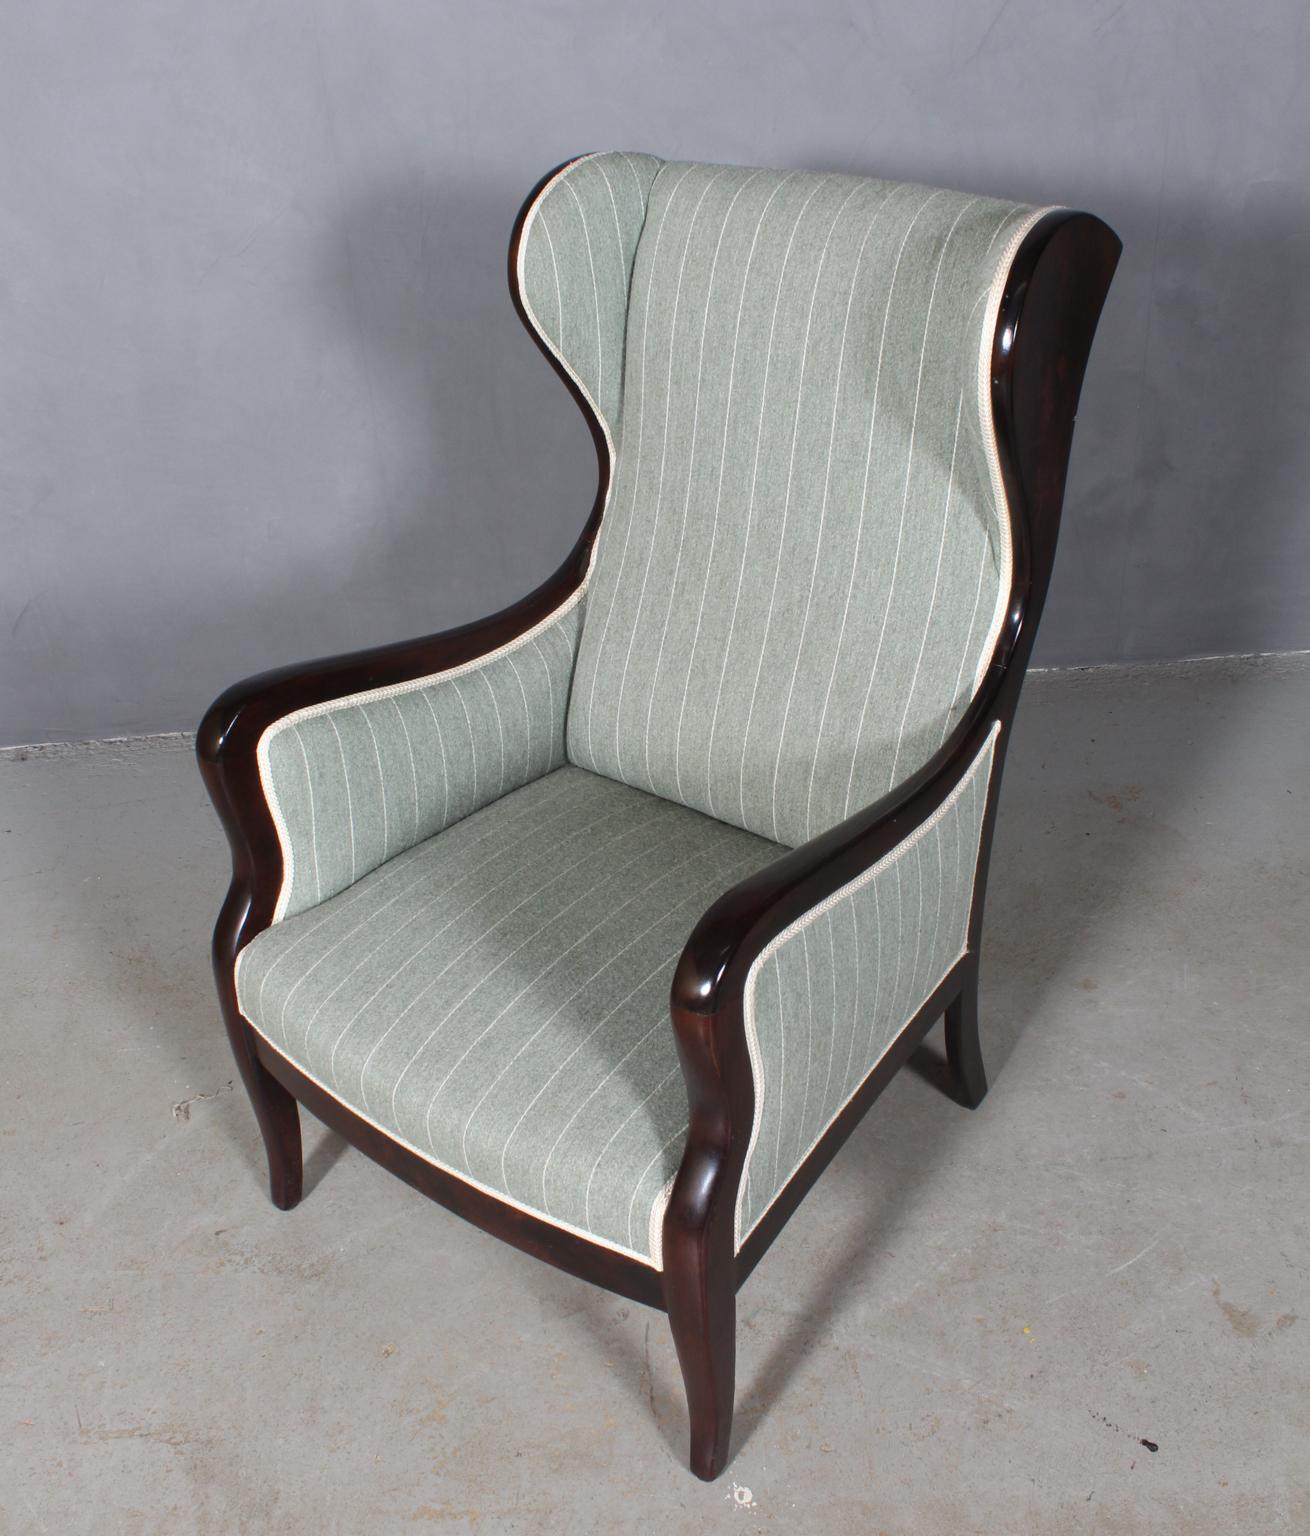 Frits Henningsen wingback chair. Frame of mahogany

Newly upholstered with striped upholstery.

Designed in the 1930s, made by Frits Henningsen.
 